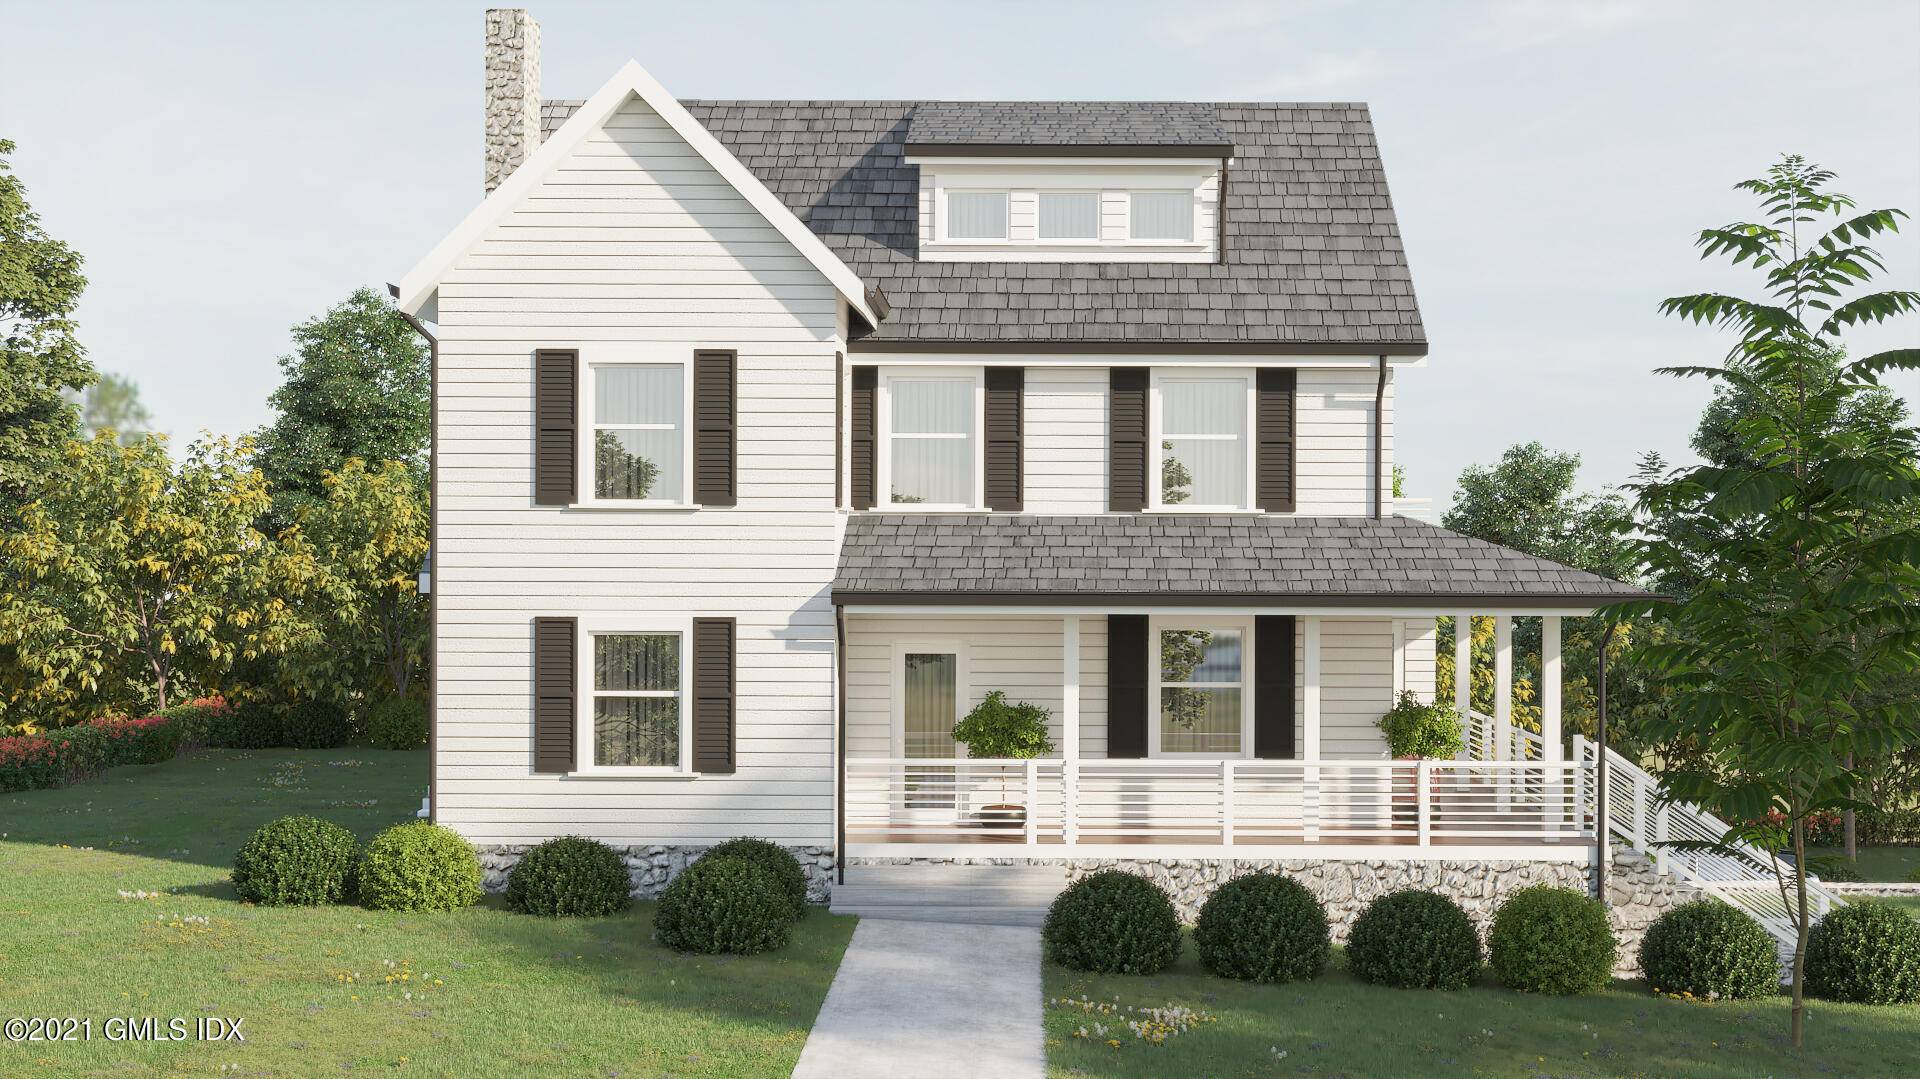 This stunning modern farmhouse custom designed and built by F n R Luxury builders is located directly on the Mianus River.